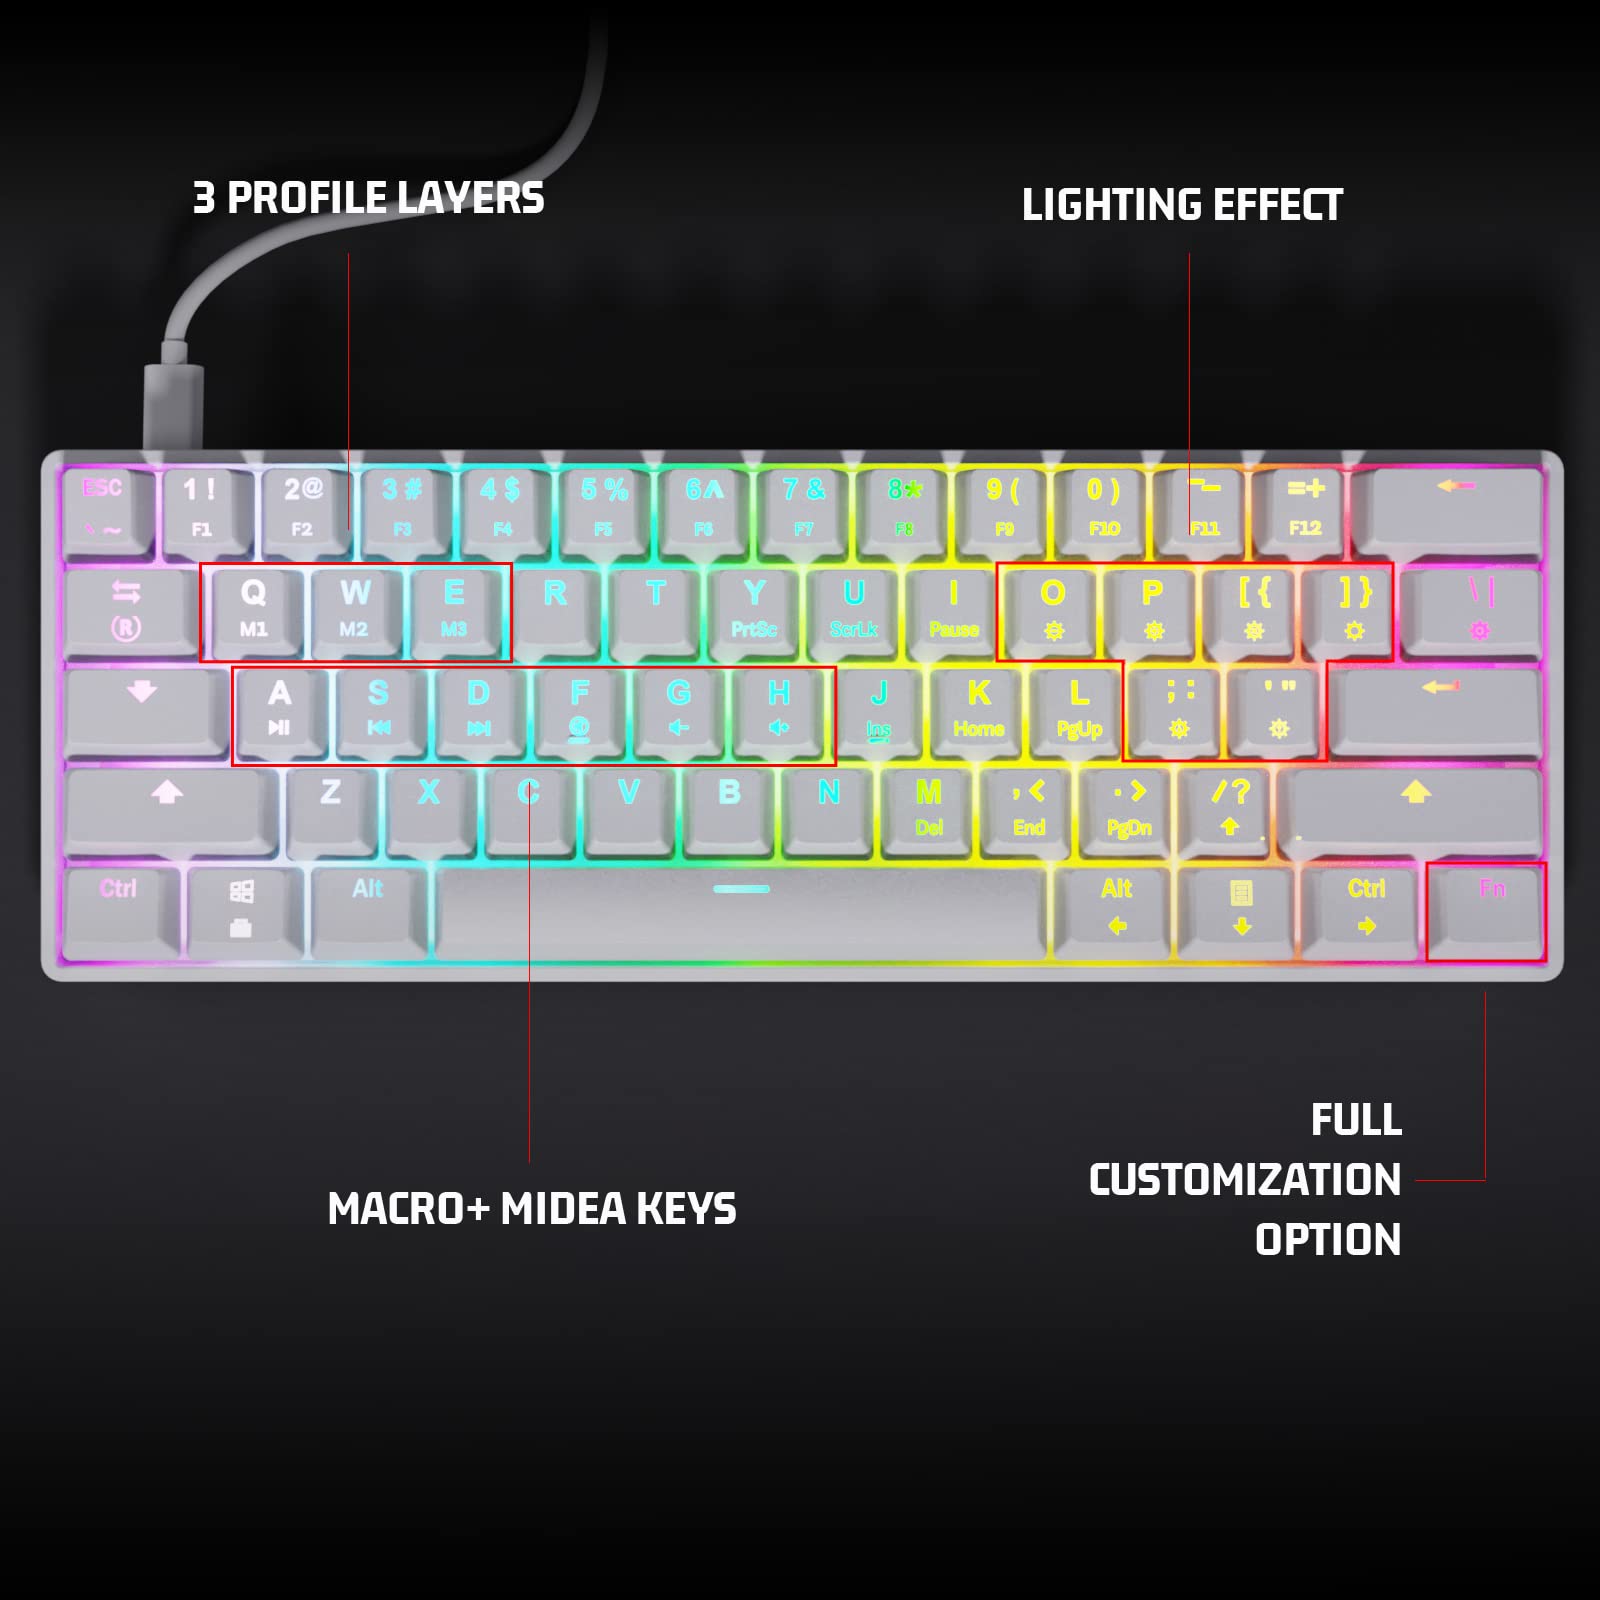 targeal 60% Mechanical Gaming Keyboard - 61 Keys Red Switch Quiet Office Computer Keyboard - Multi Color RGB Rainbow Led Backlit - Programmable for PC/Windows/Mac/Gamer - USB Wired - White